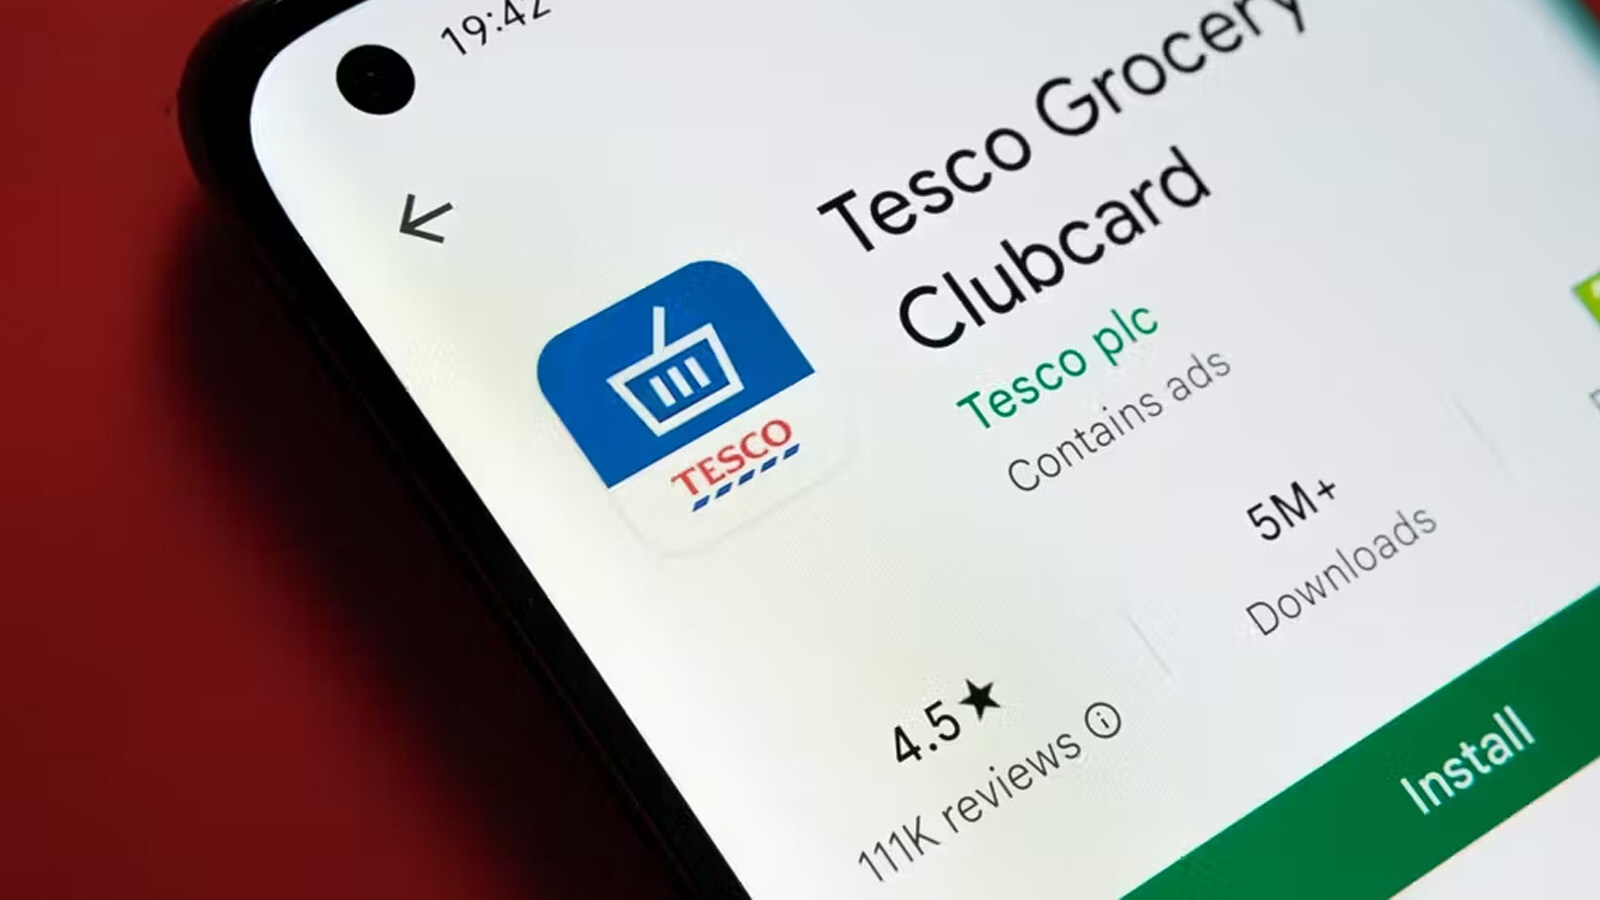 The algorithms powering loyalty: How an AI firm is helping Tesco gamify Clubcard [Econsultancy]